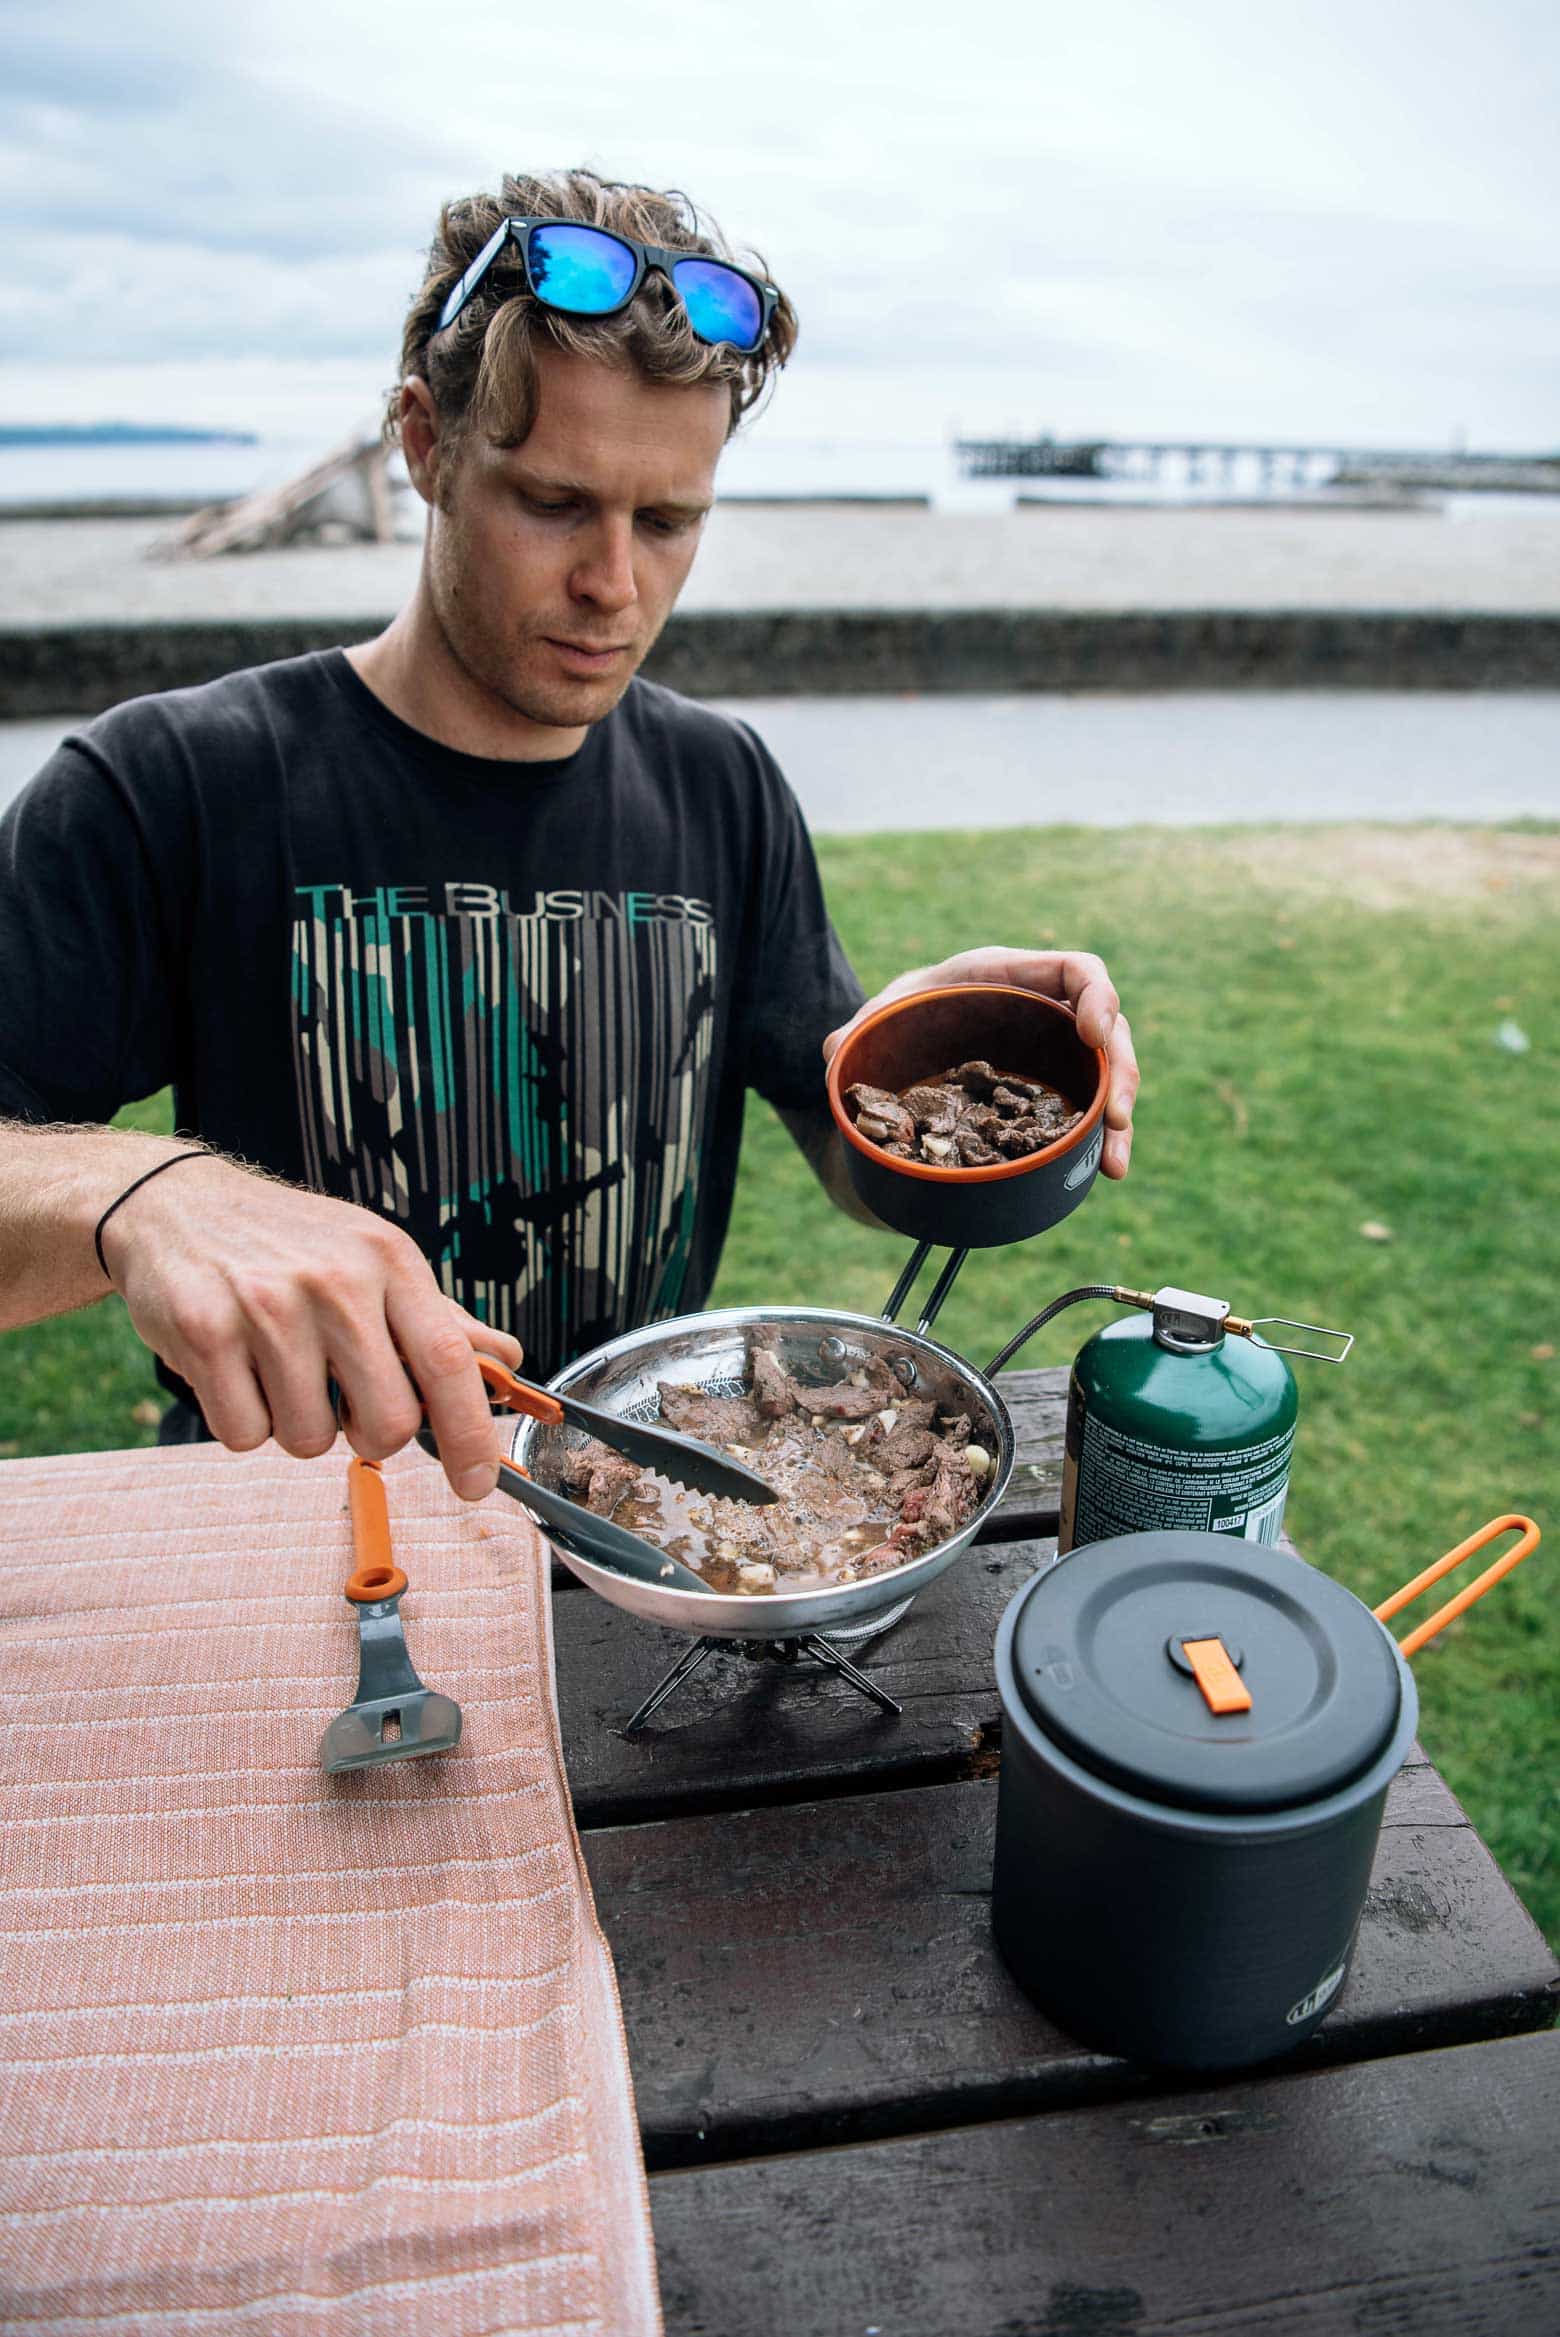 Cooking stir fry meat in a camp skillet